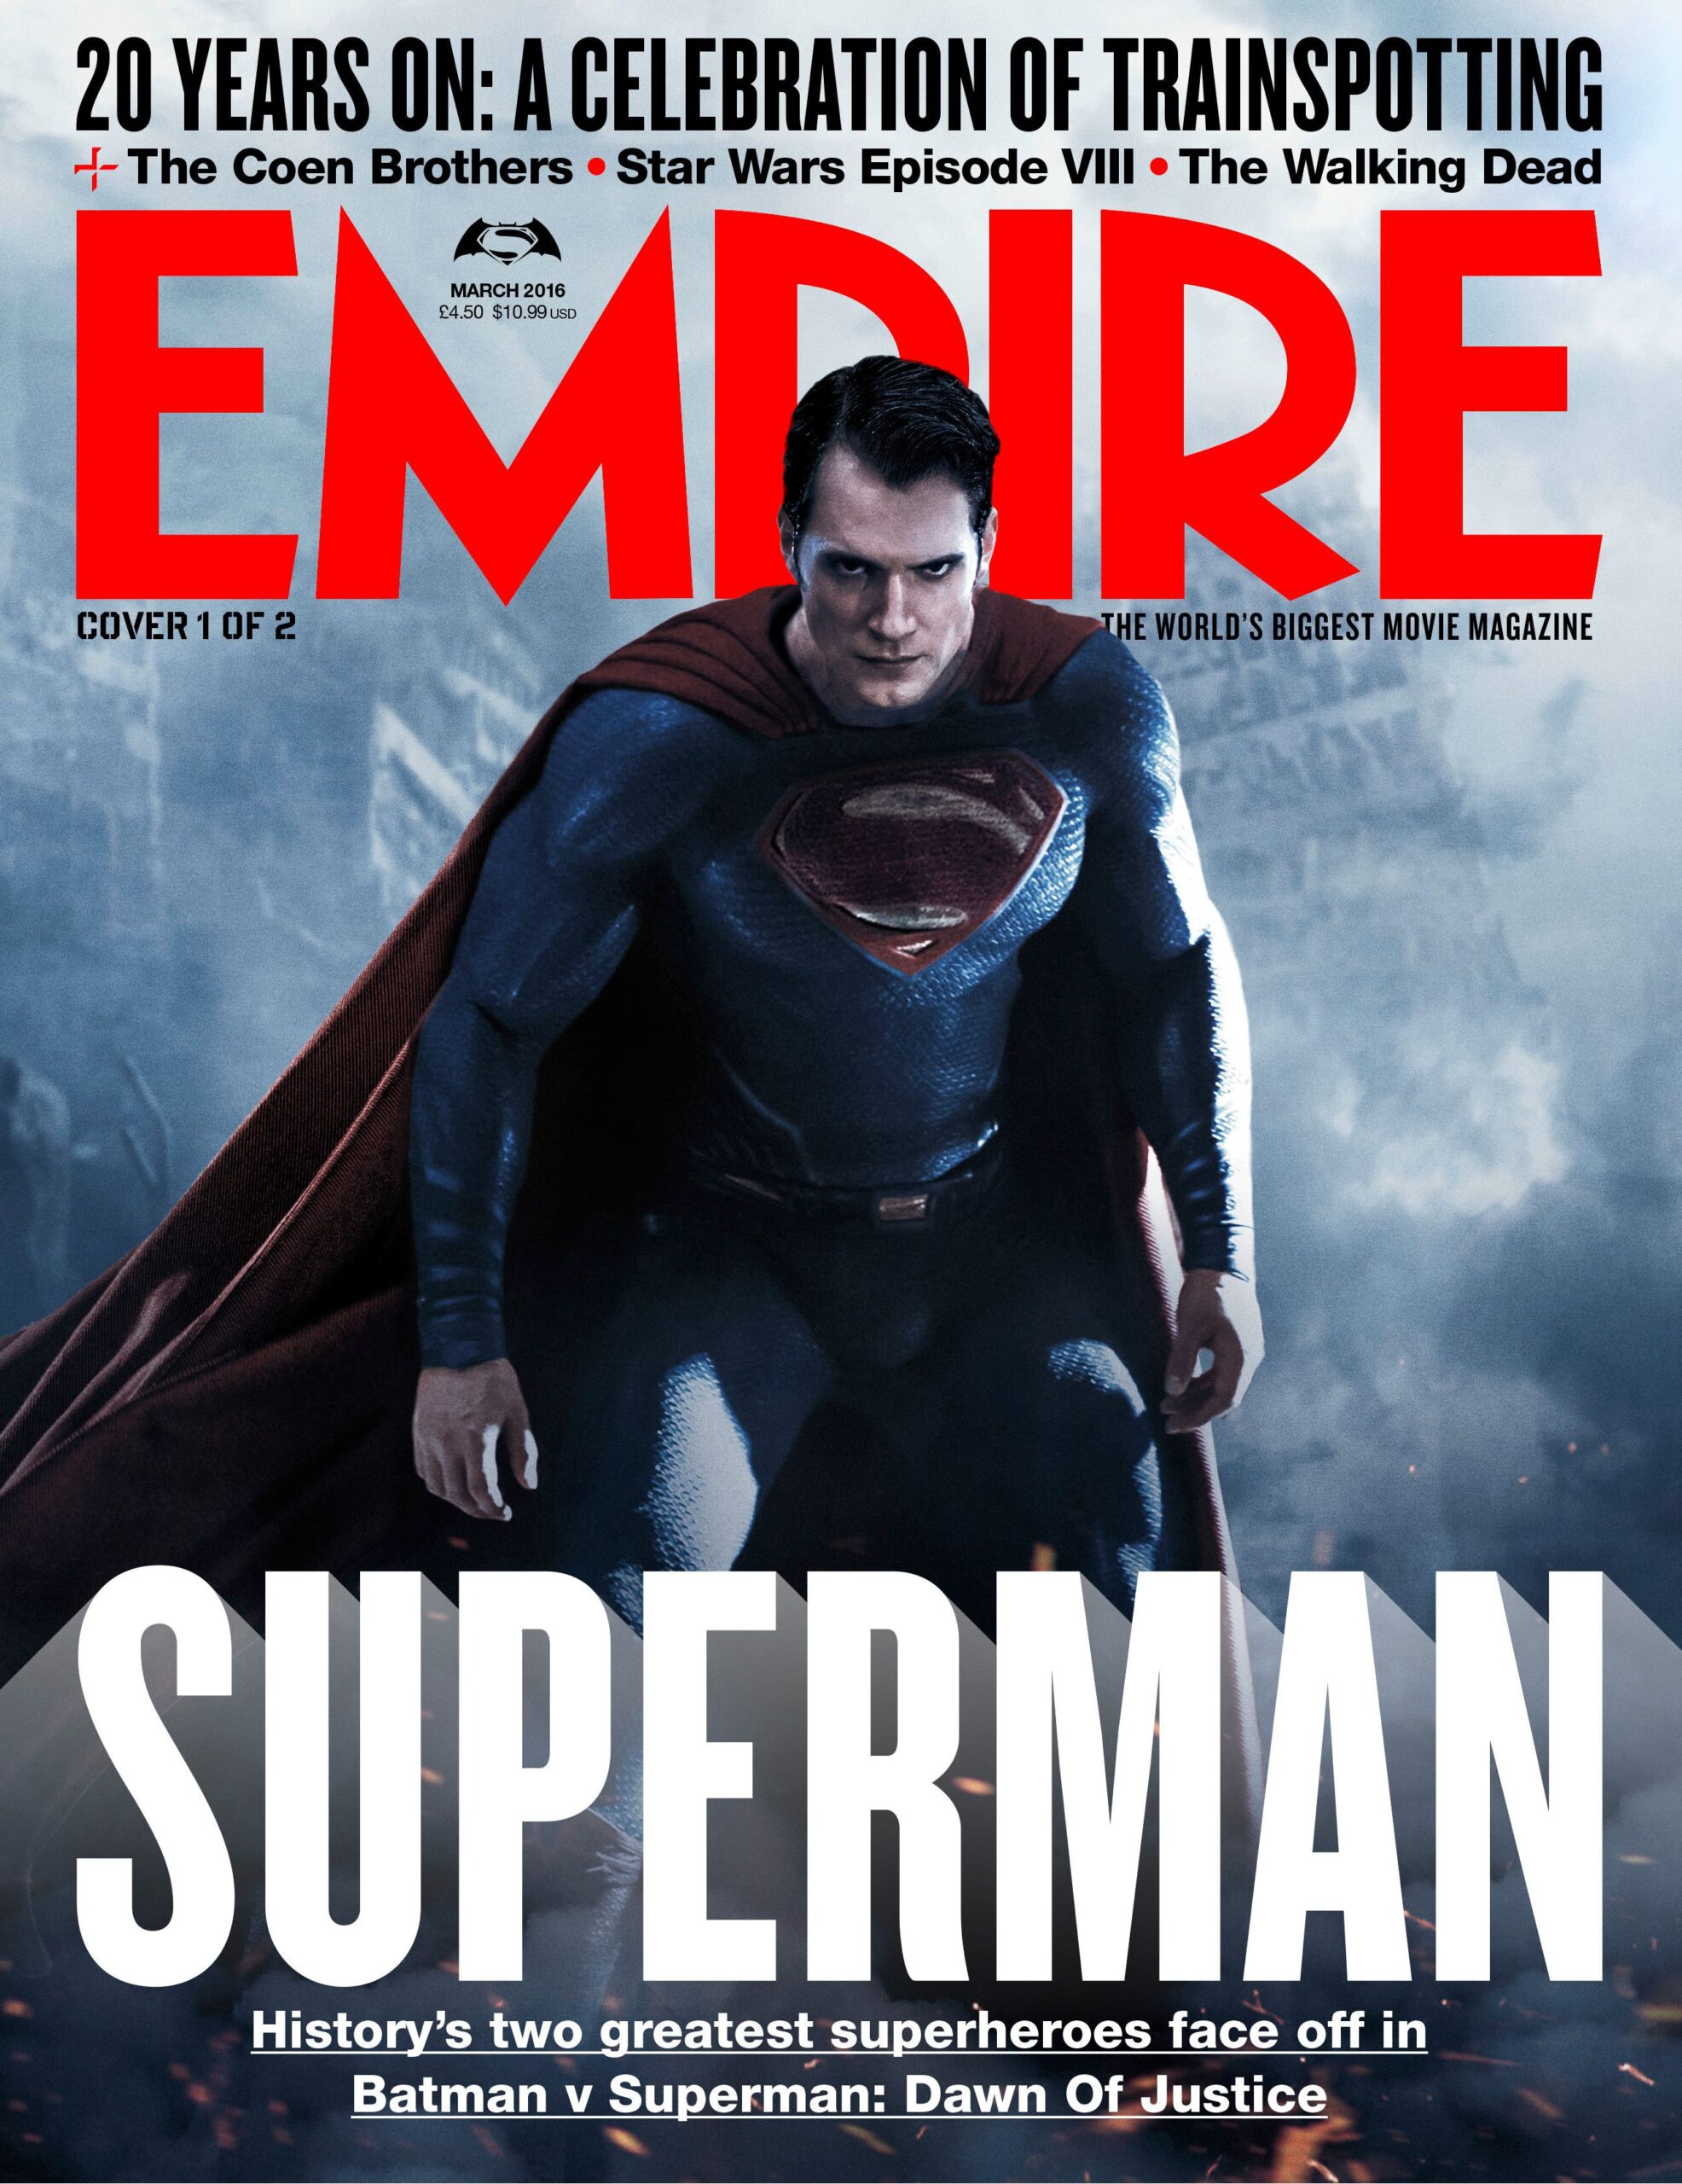 Superman cover for the March issue of Empire Magazine